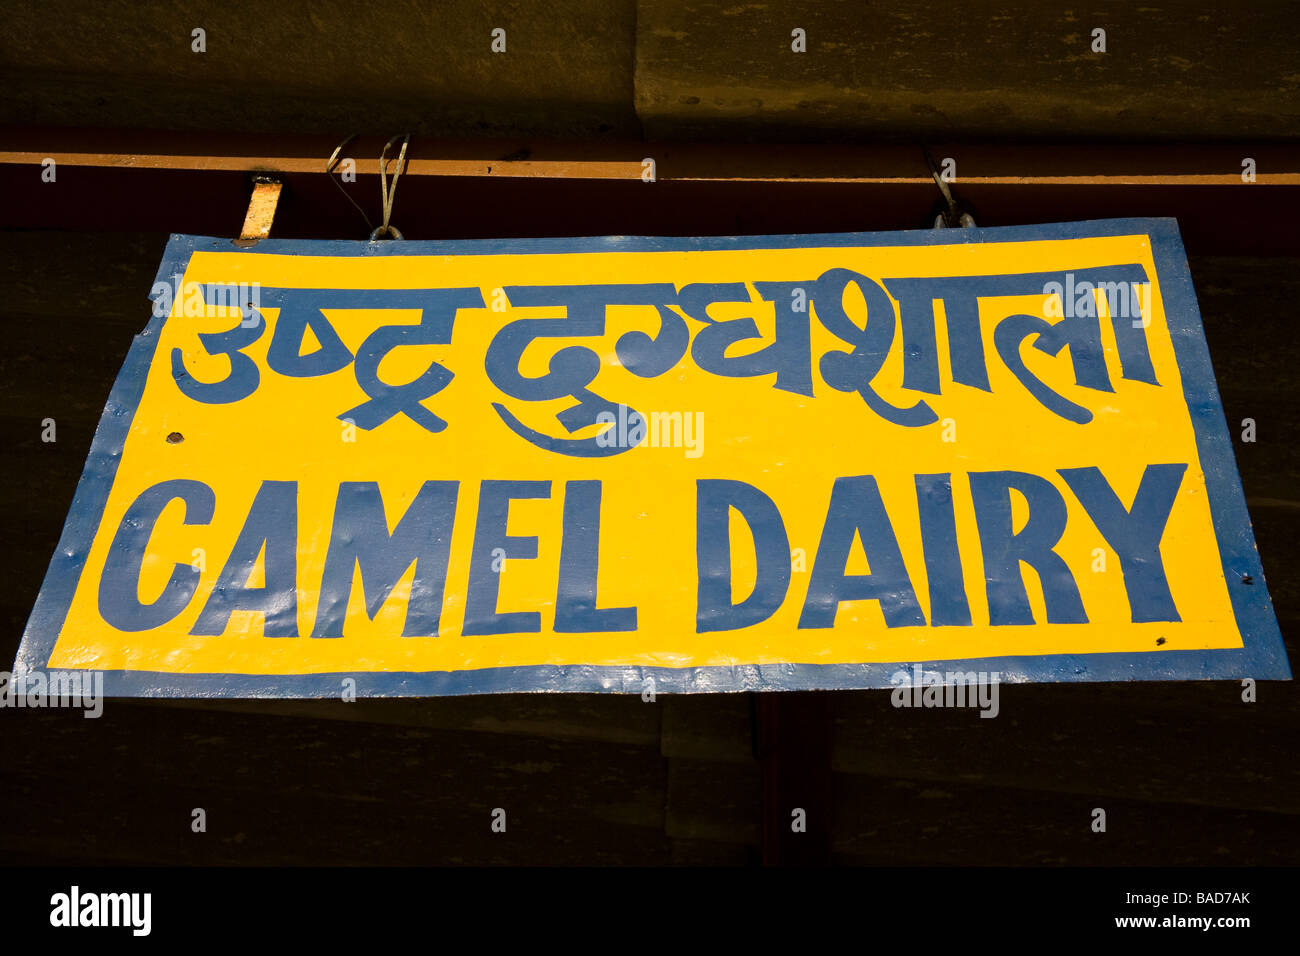 Camel Dairy sign at the National Camel Research Centre, Jorbeer, Bikaner, Rajasthan, India Stock Photo